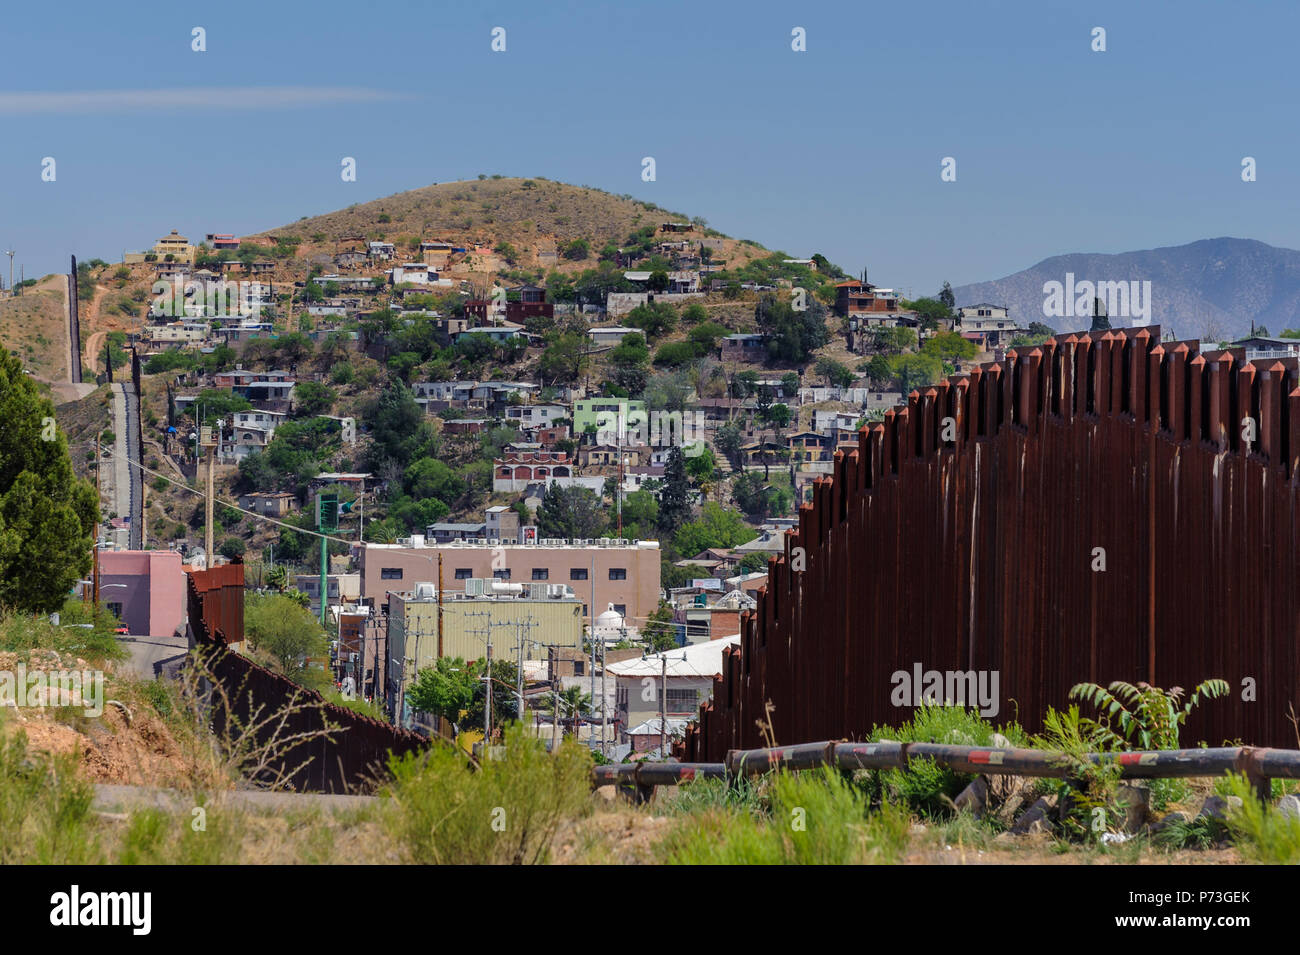 United States Border Fence, pedestrian barrier, looking east from US side, showing Nogales Sonora Mexico on hillside.  April 12, 2018 Stock Photo